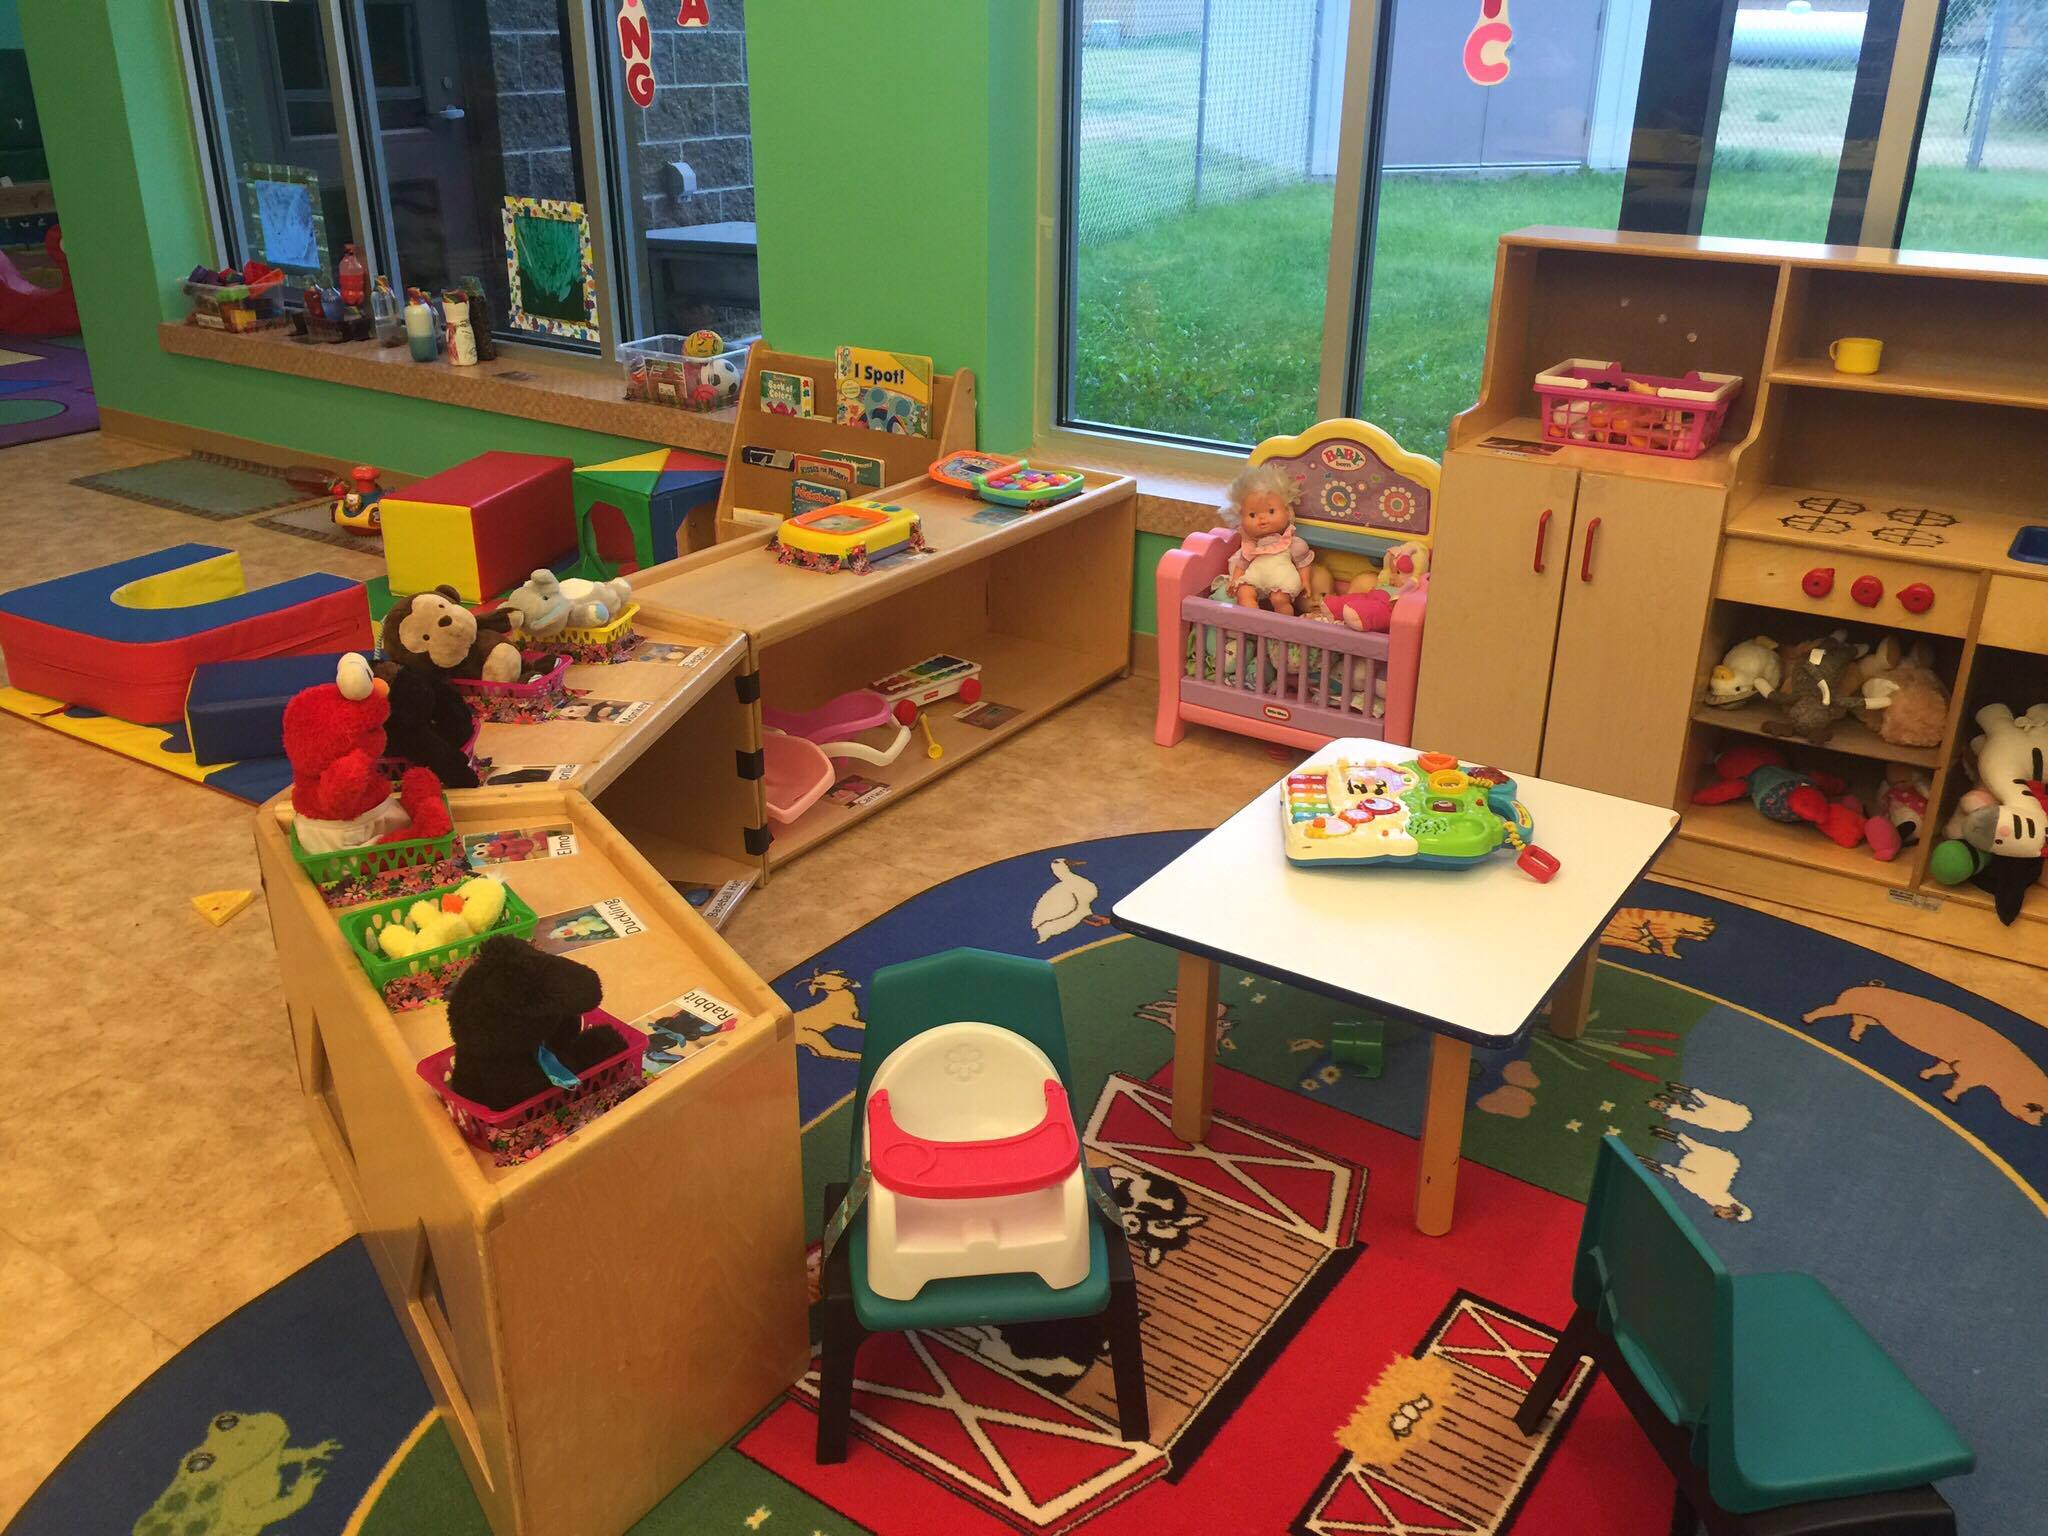 Sitting Bull College's "Kampus Kids" infant and toddler classroom.